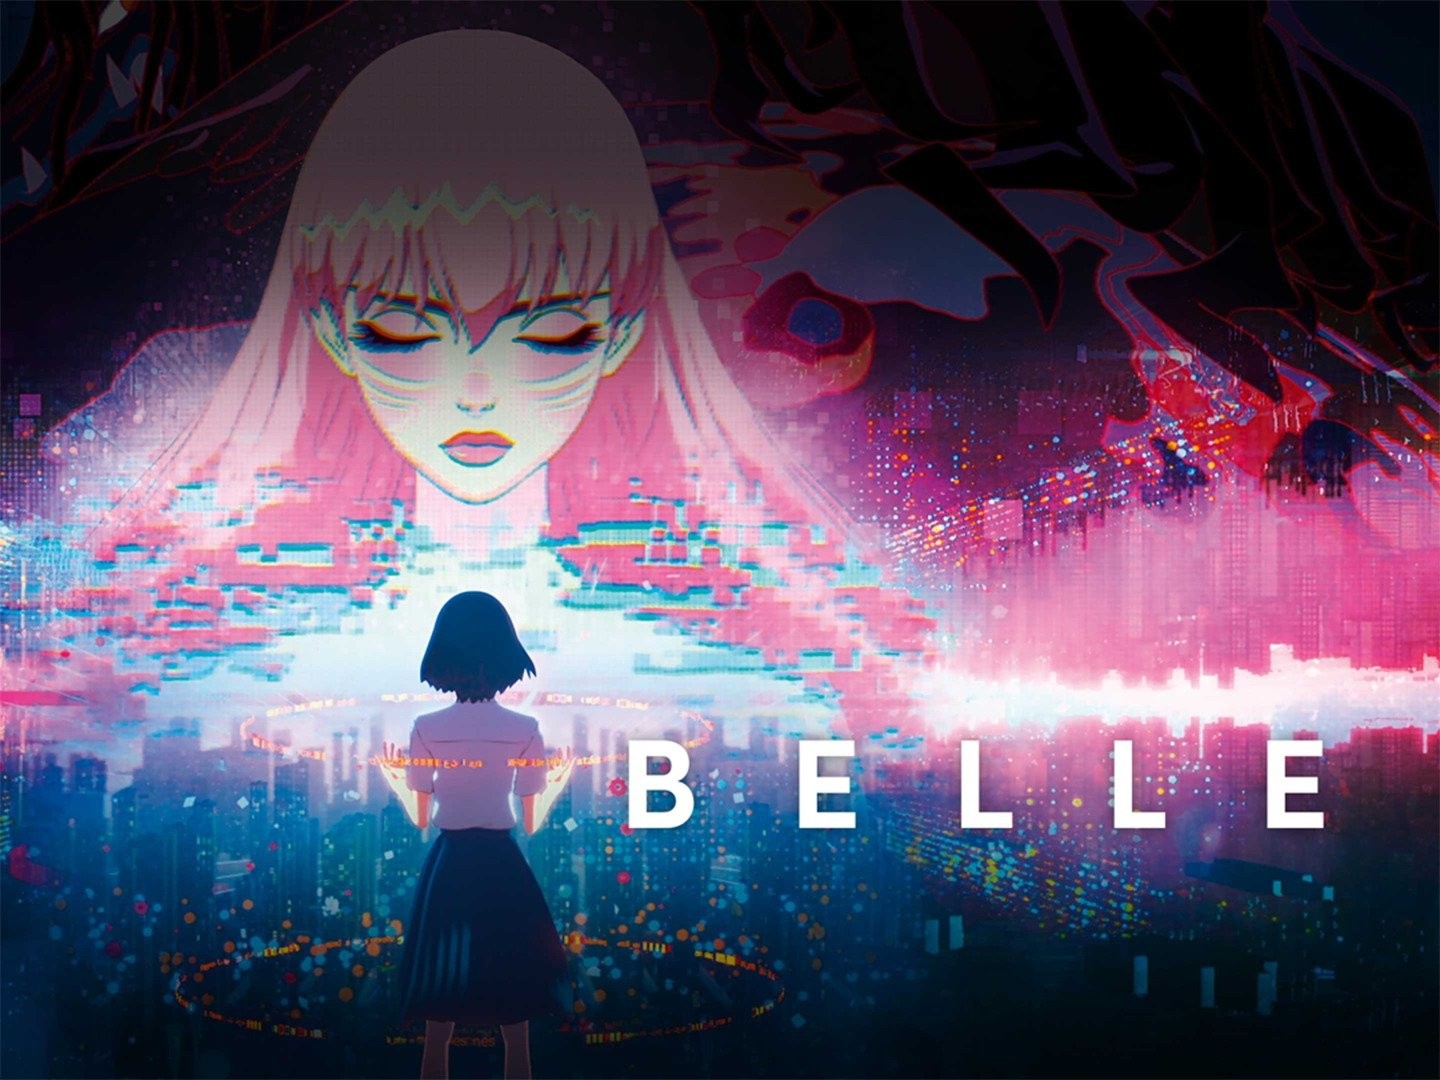 Belle: Anime reinterpretation of Beauty and the Beast from Mirai director  Mamoru Hosoda is optimistic about the metaverse's potential - ABC News